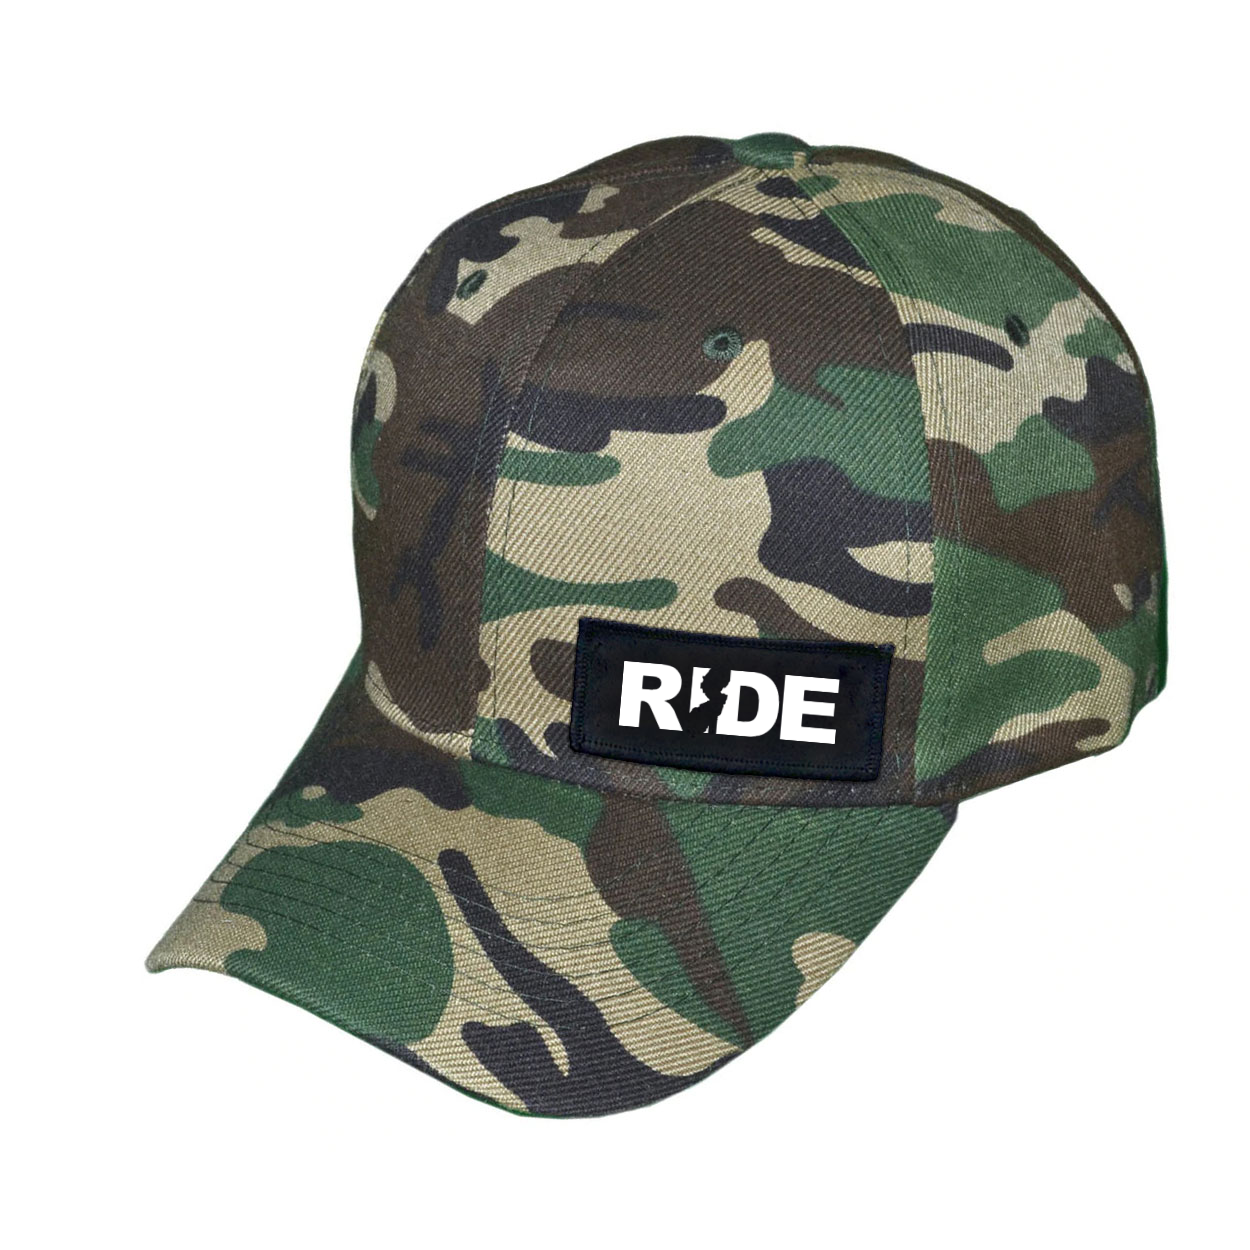 Ride New Jersey Night Out Woven Patch Velcro Trucker Hat Camo